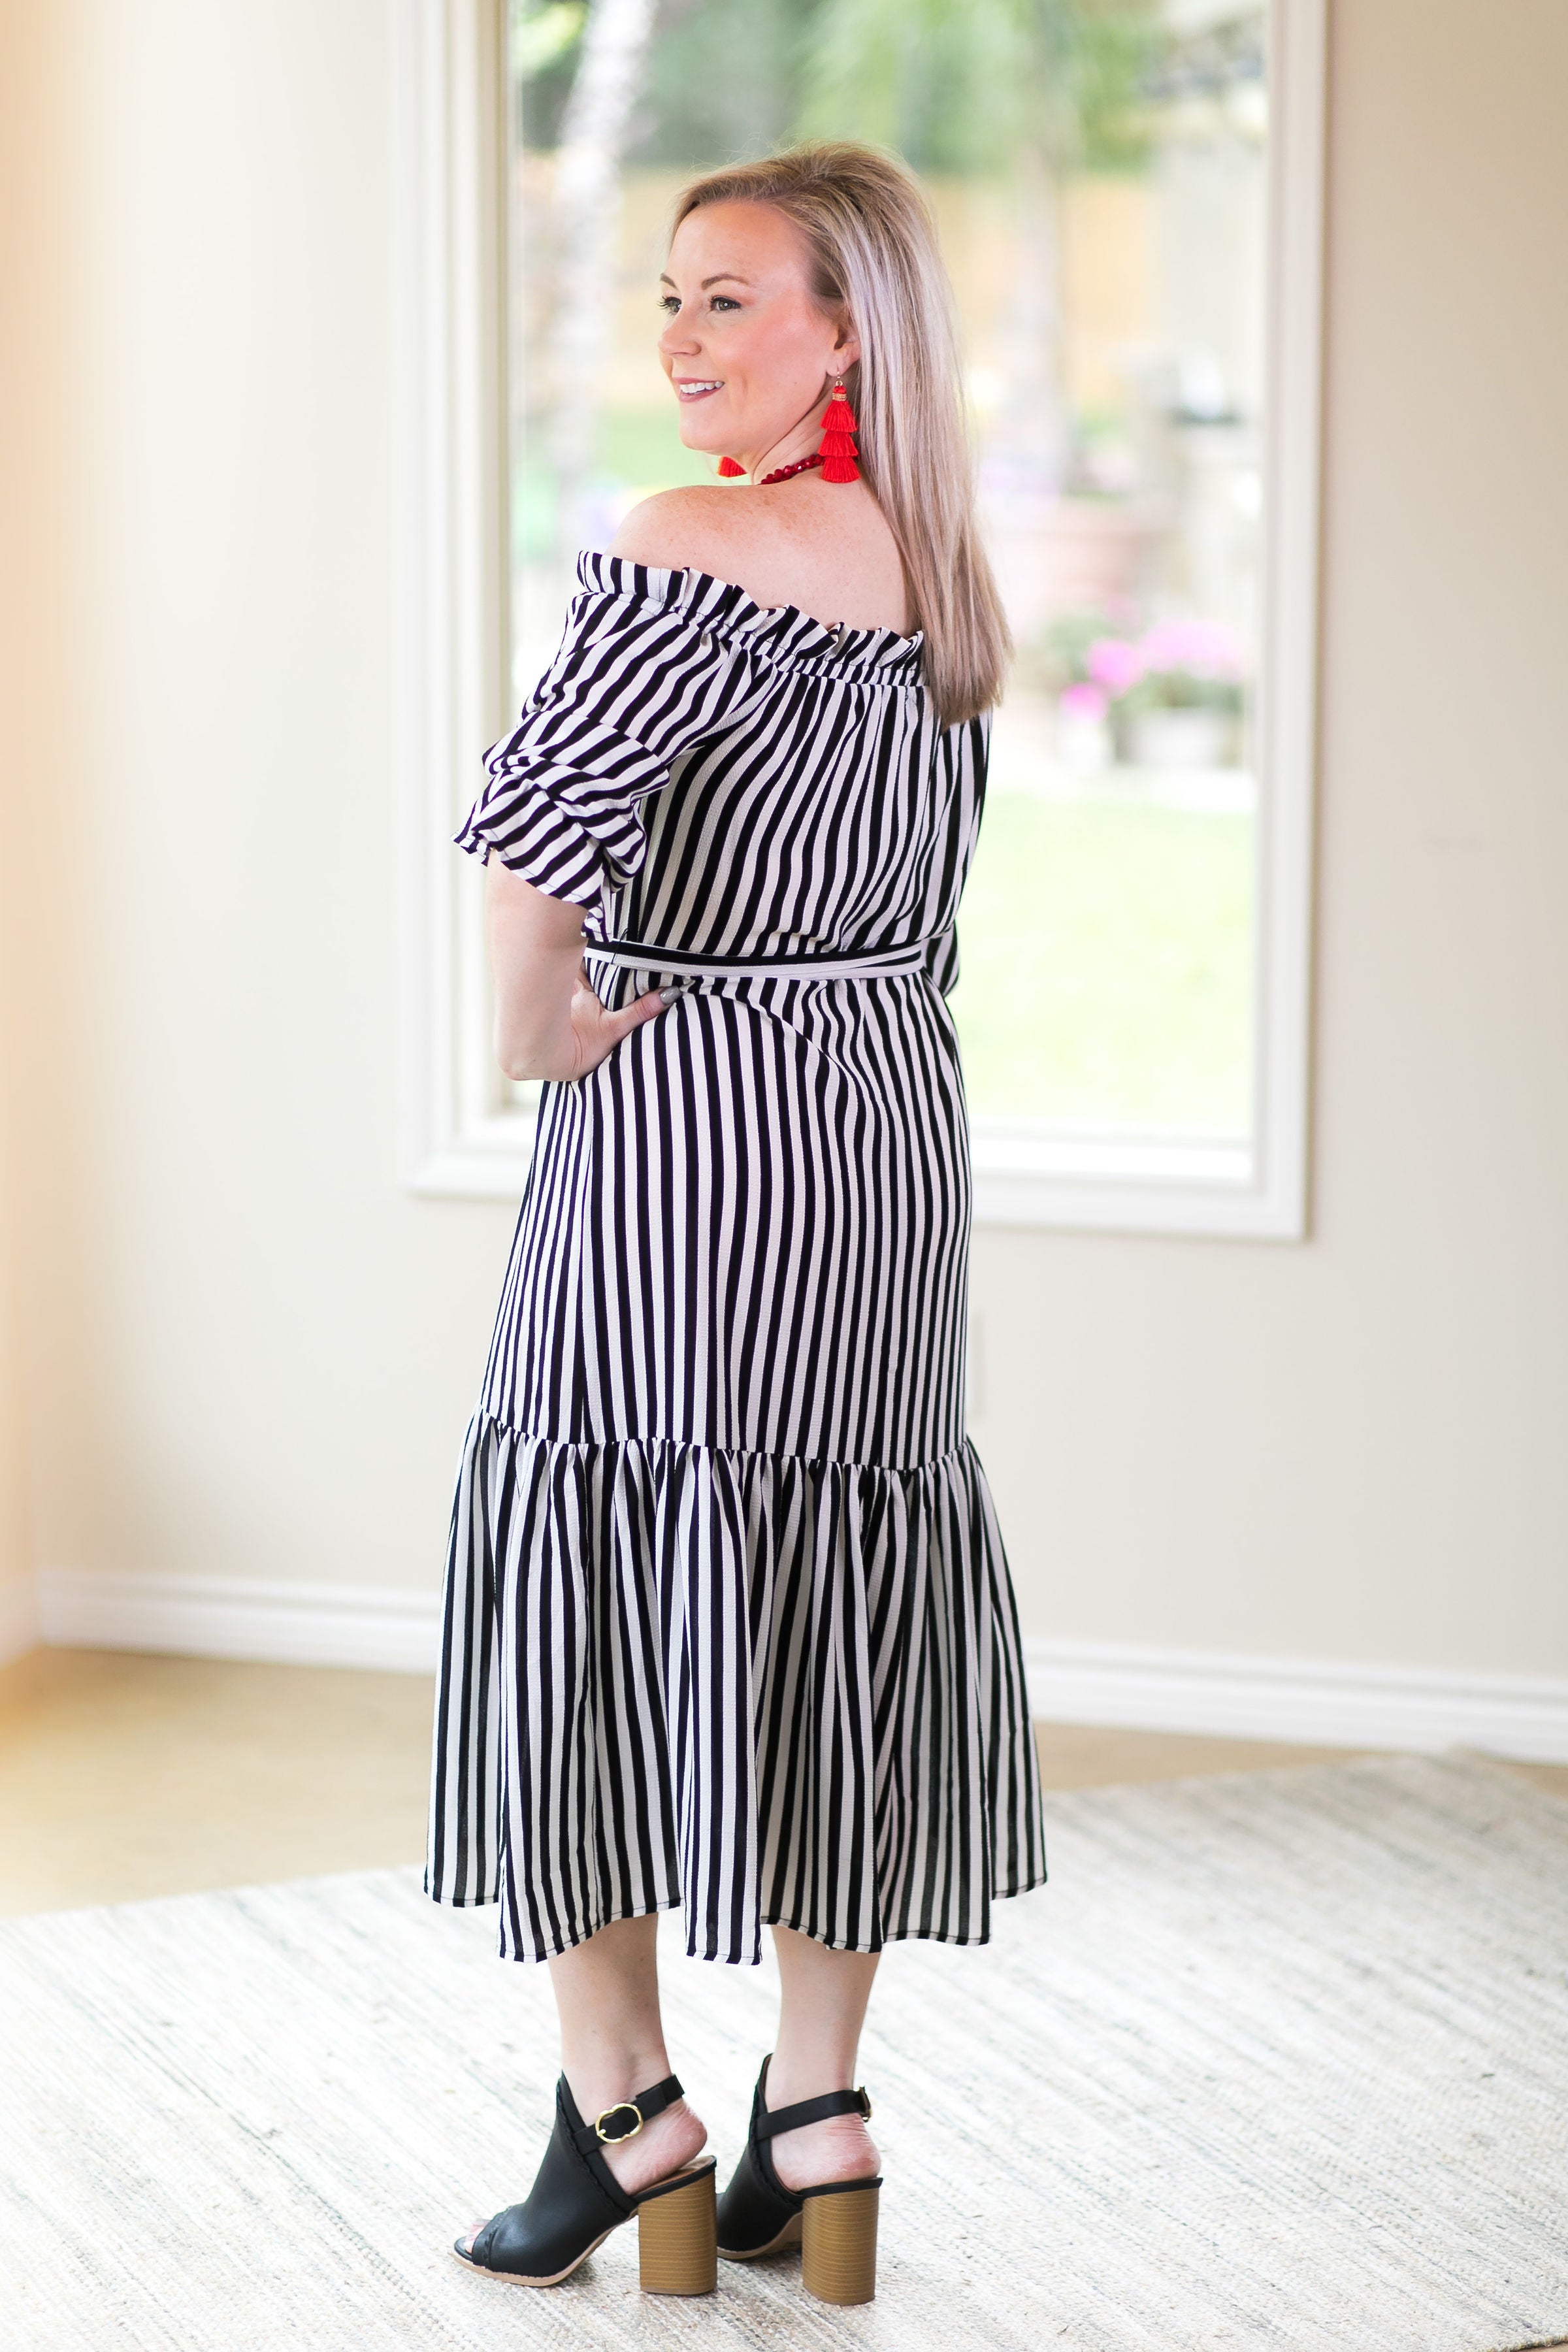 Jailhouse Rock Flying Tomato Trendy affordable college girl bohemian funky off the shoulder stripe midi ruffle dress black and white jail